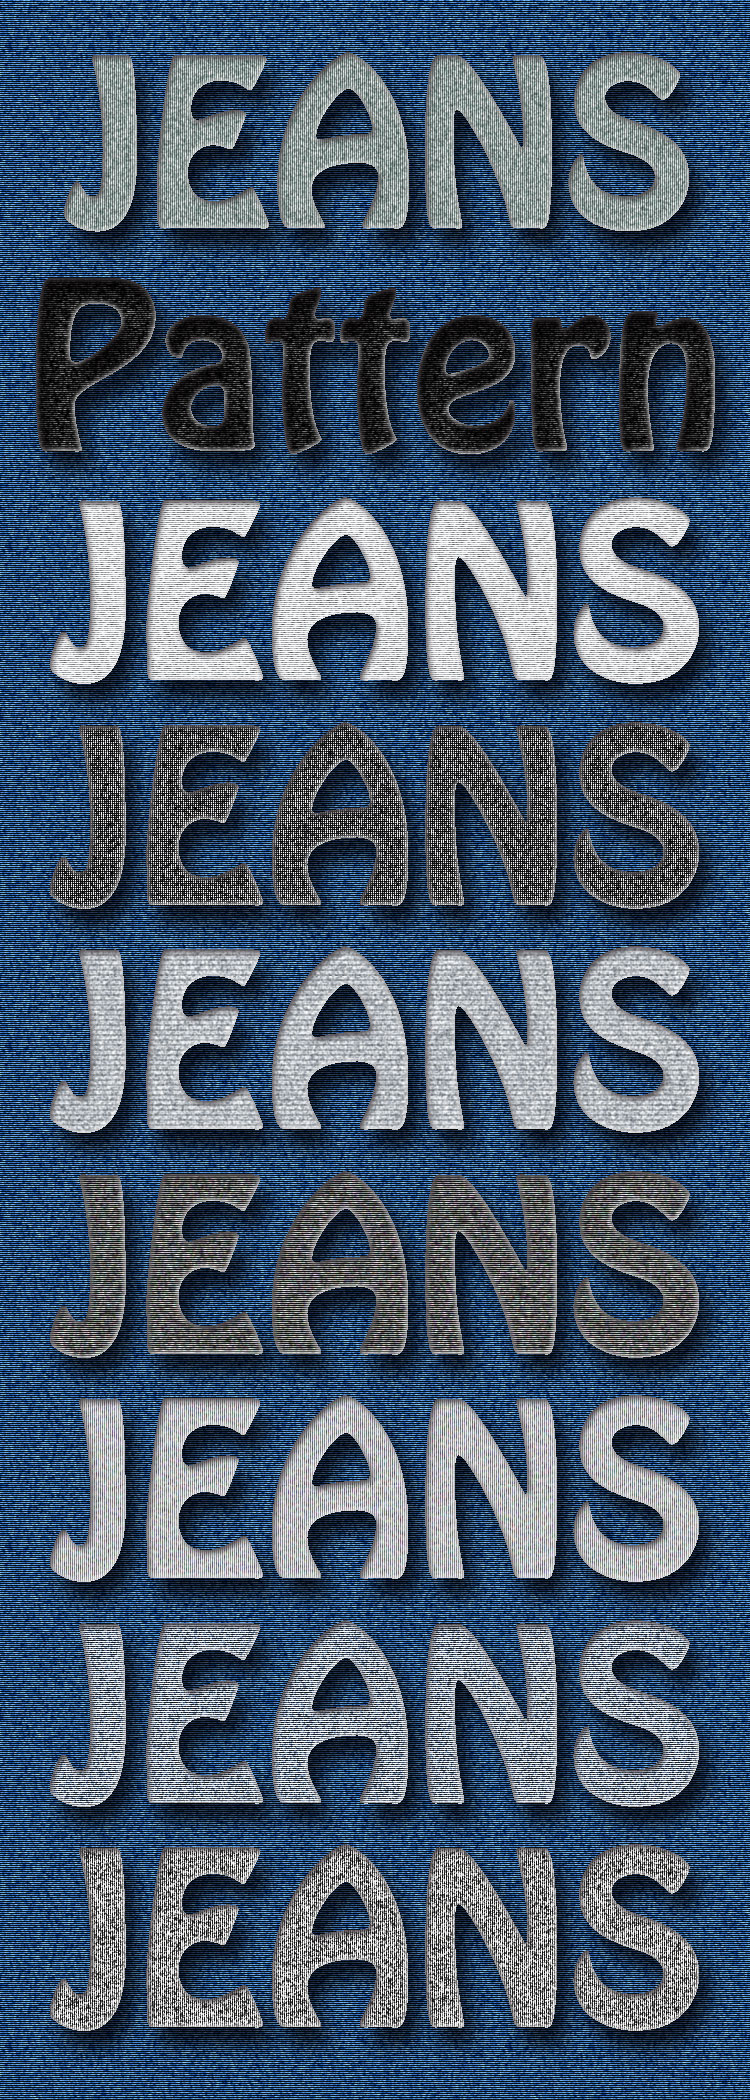 PS Jeans Patroon